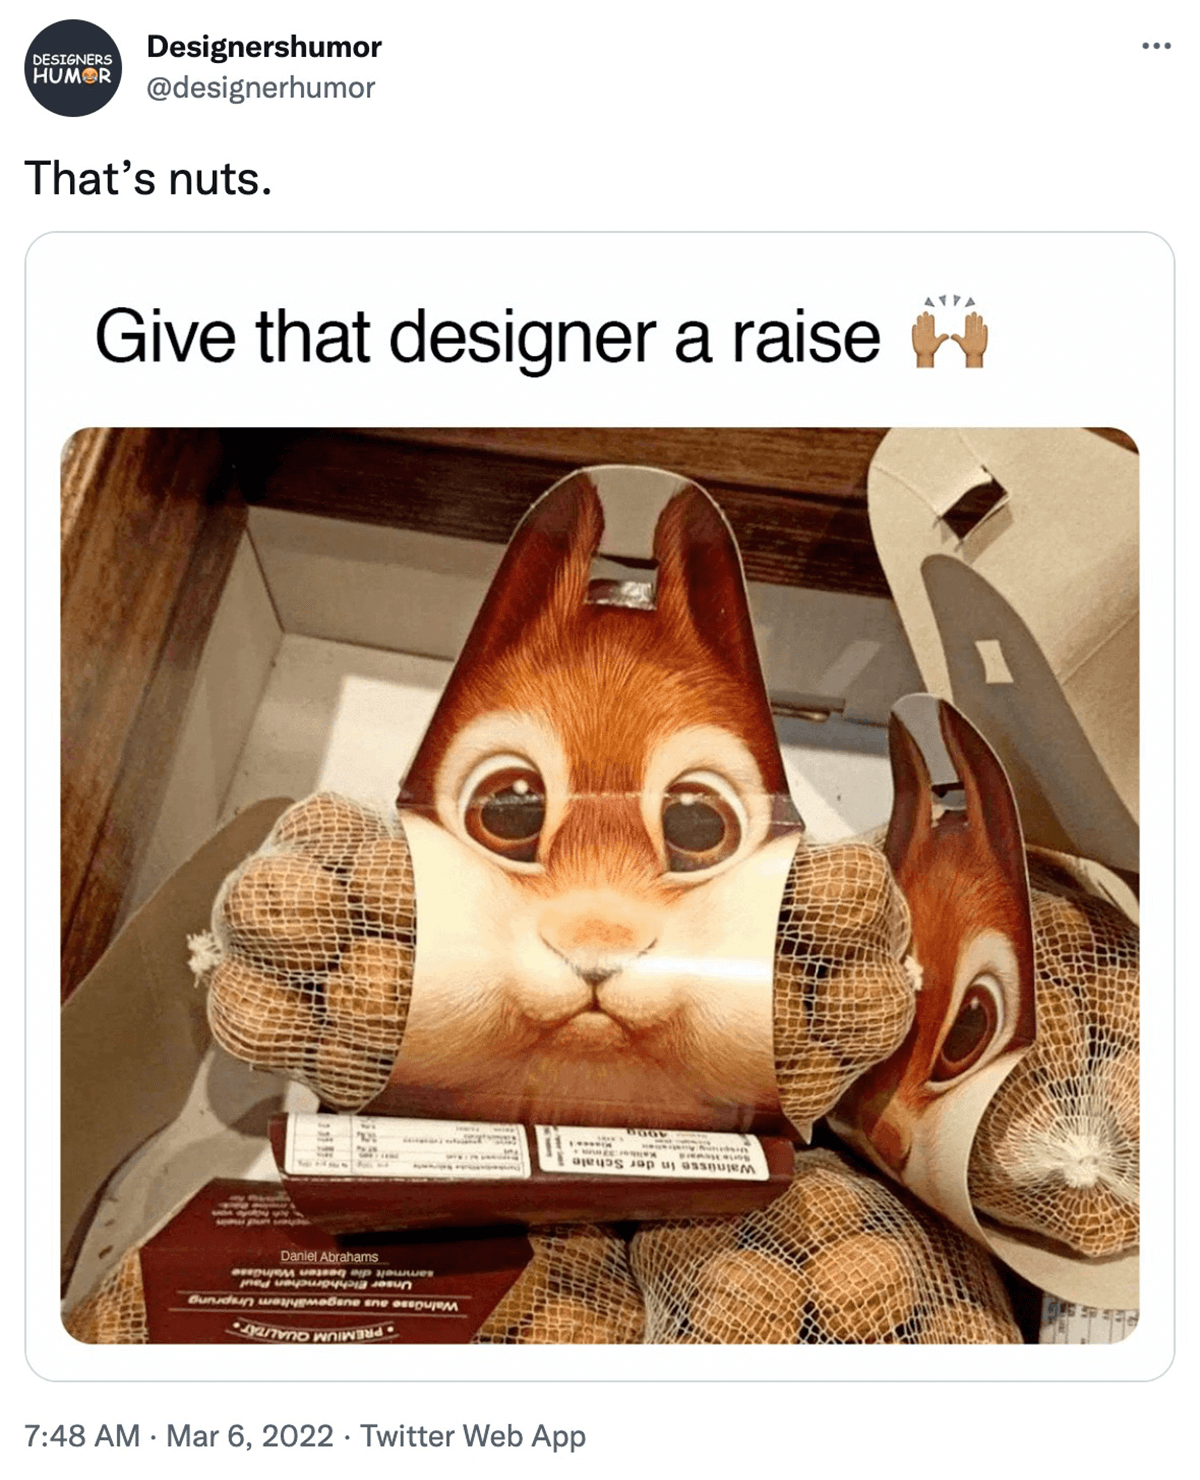 @designerhumor on twitter: Give that designer a raise. package of nuts with a squirrel wrapper and the nuts popping out for the squirrels cheeks